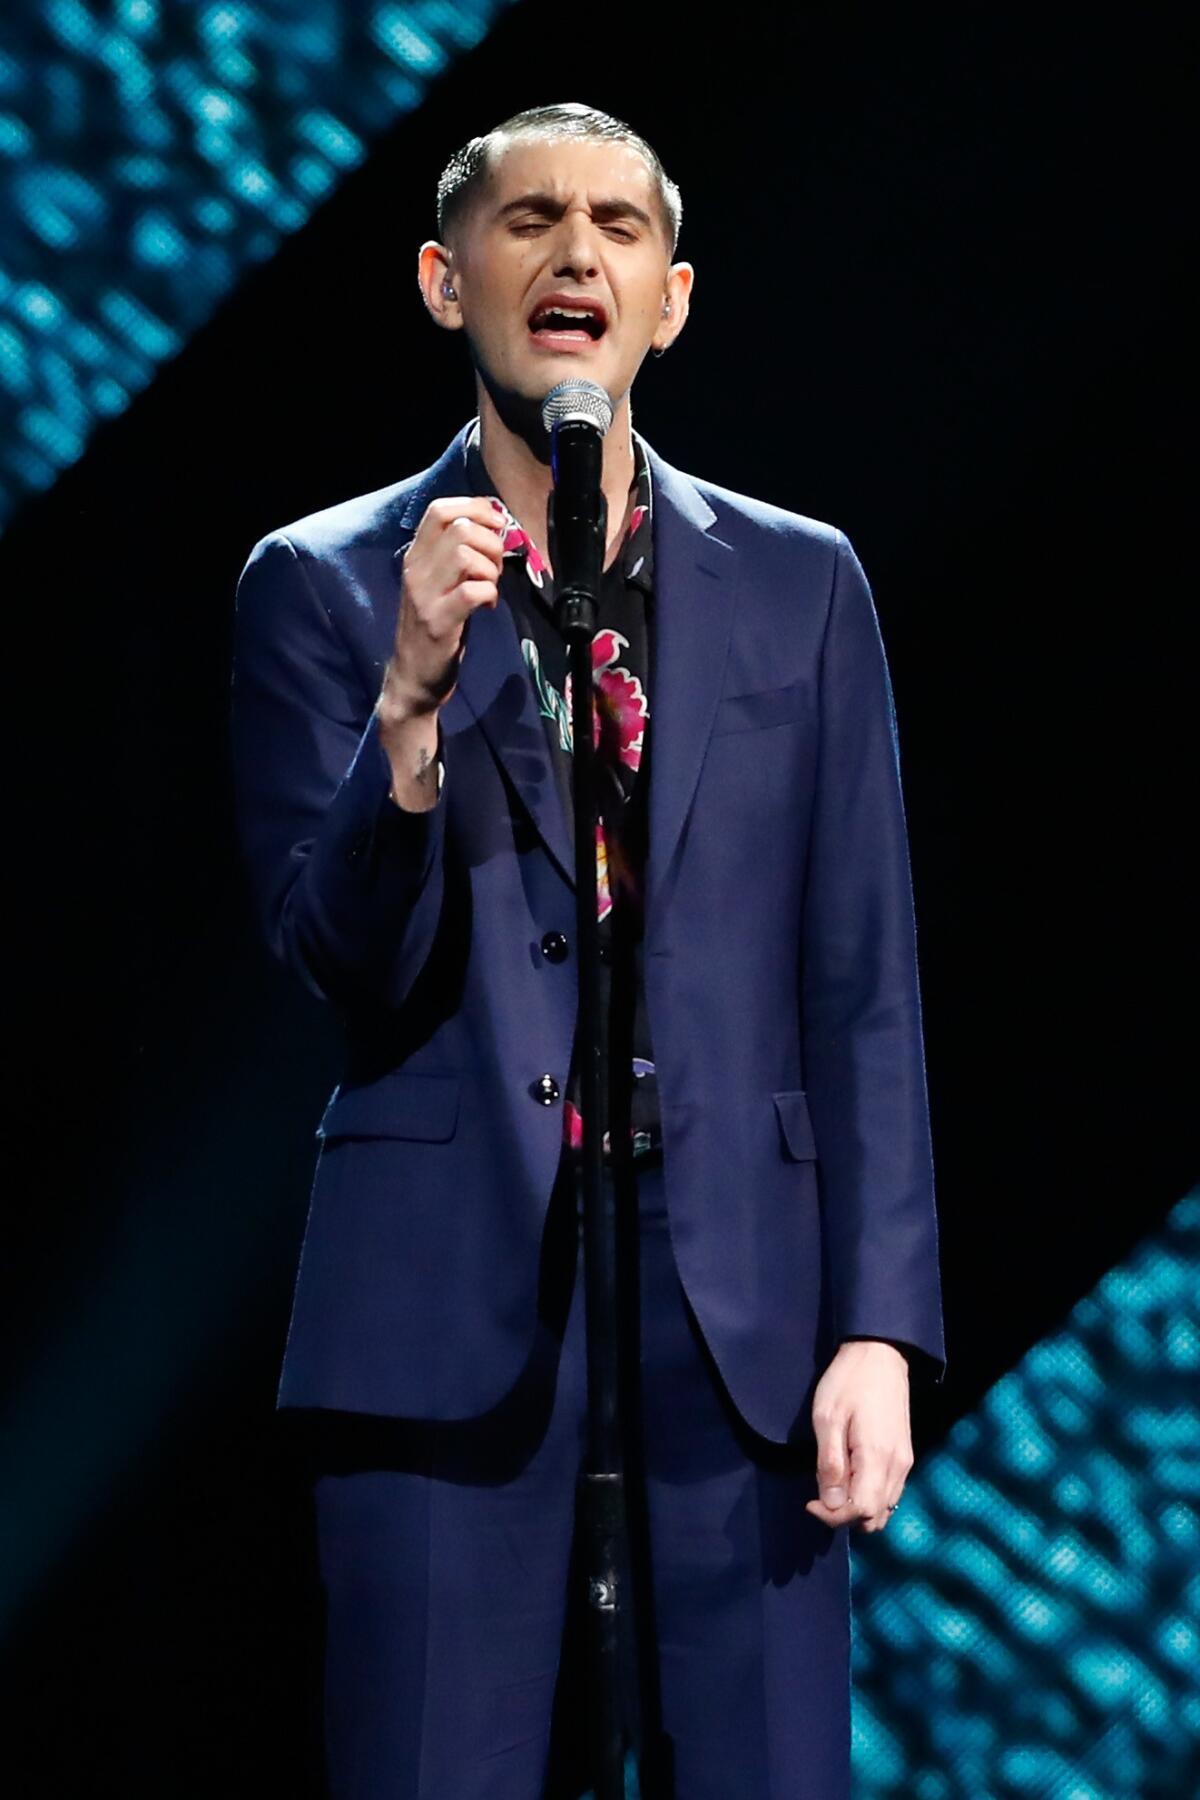 Alex Anwandter performs onstage during The 17th Latin Grammy Awards premiere ceremony at MGM Grand Garden Arena in Las Vegas, Nevada.